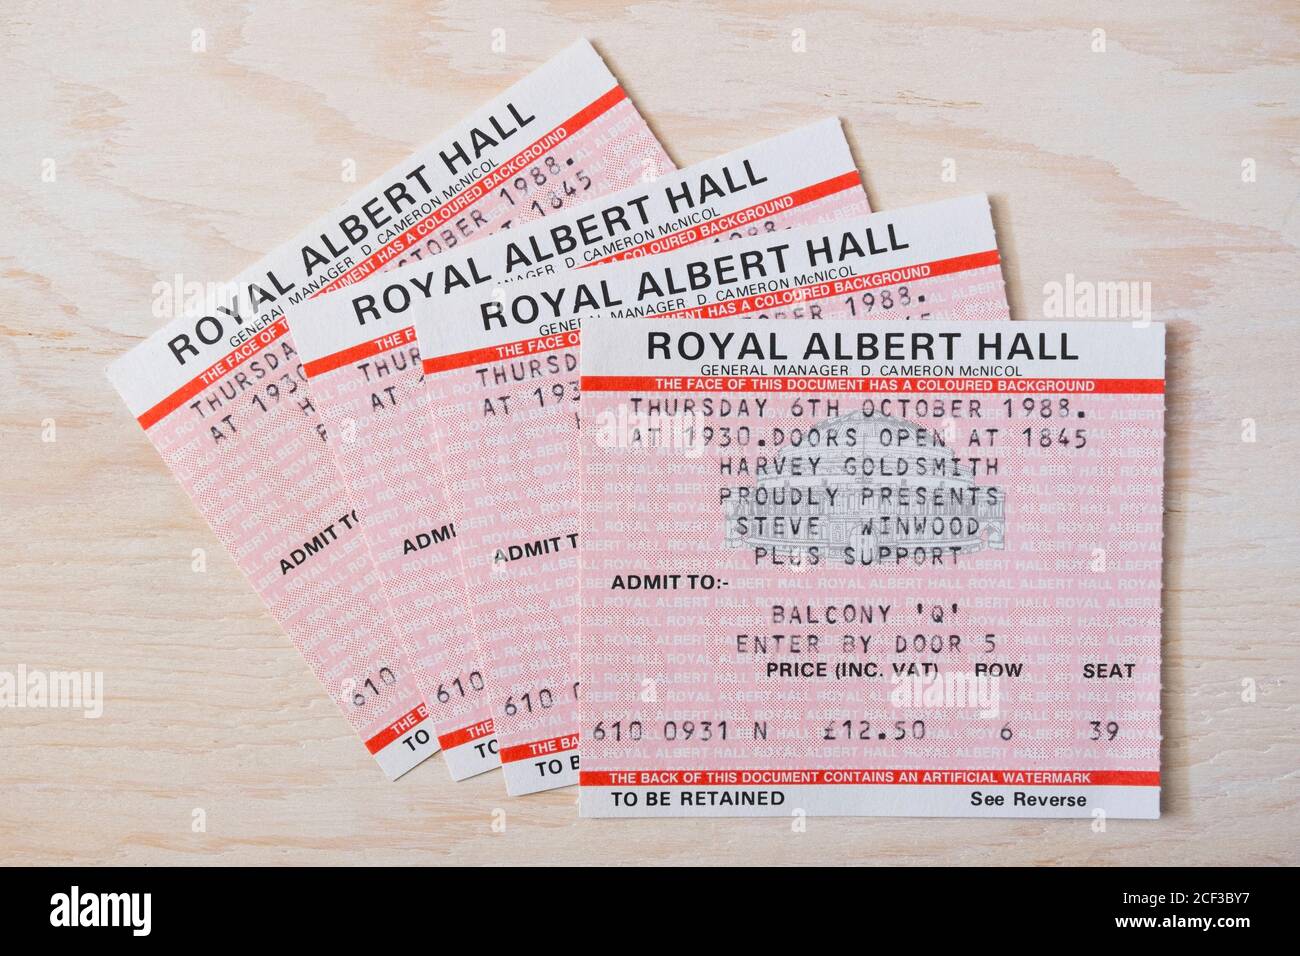 Concert ticket stubs for Steve Winwood in Balcony Q, Thursday 6th October 1988 at the Royal Albert Hall in London, UK Stock Photo